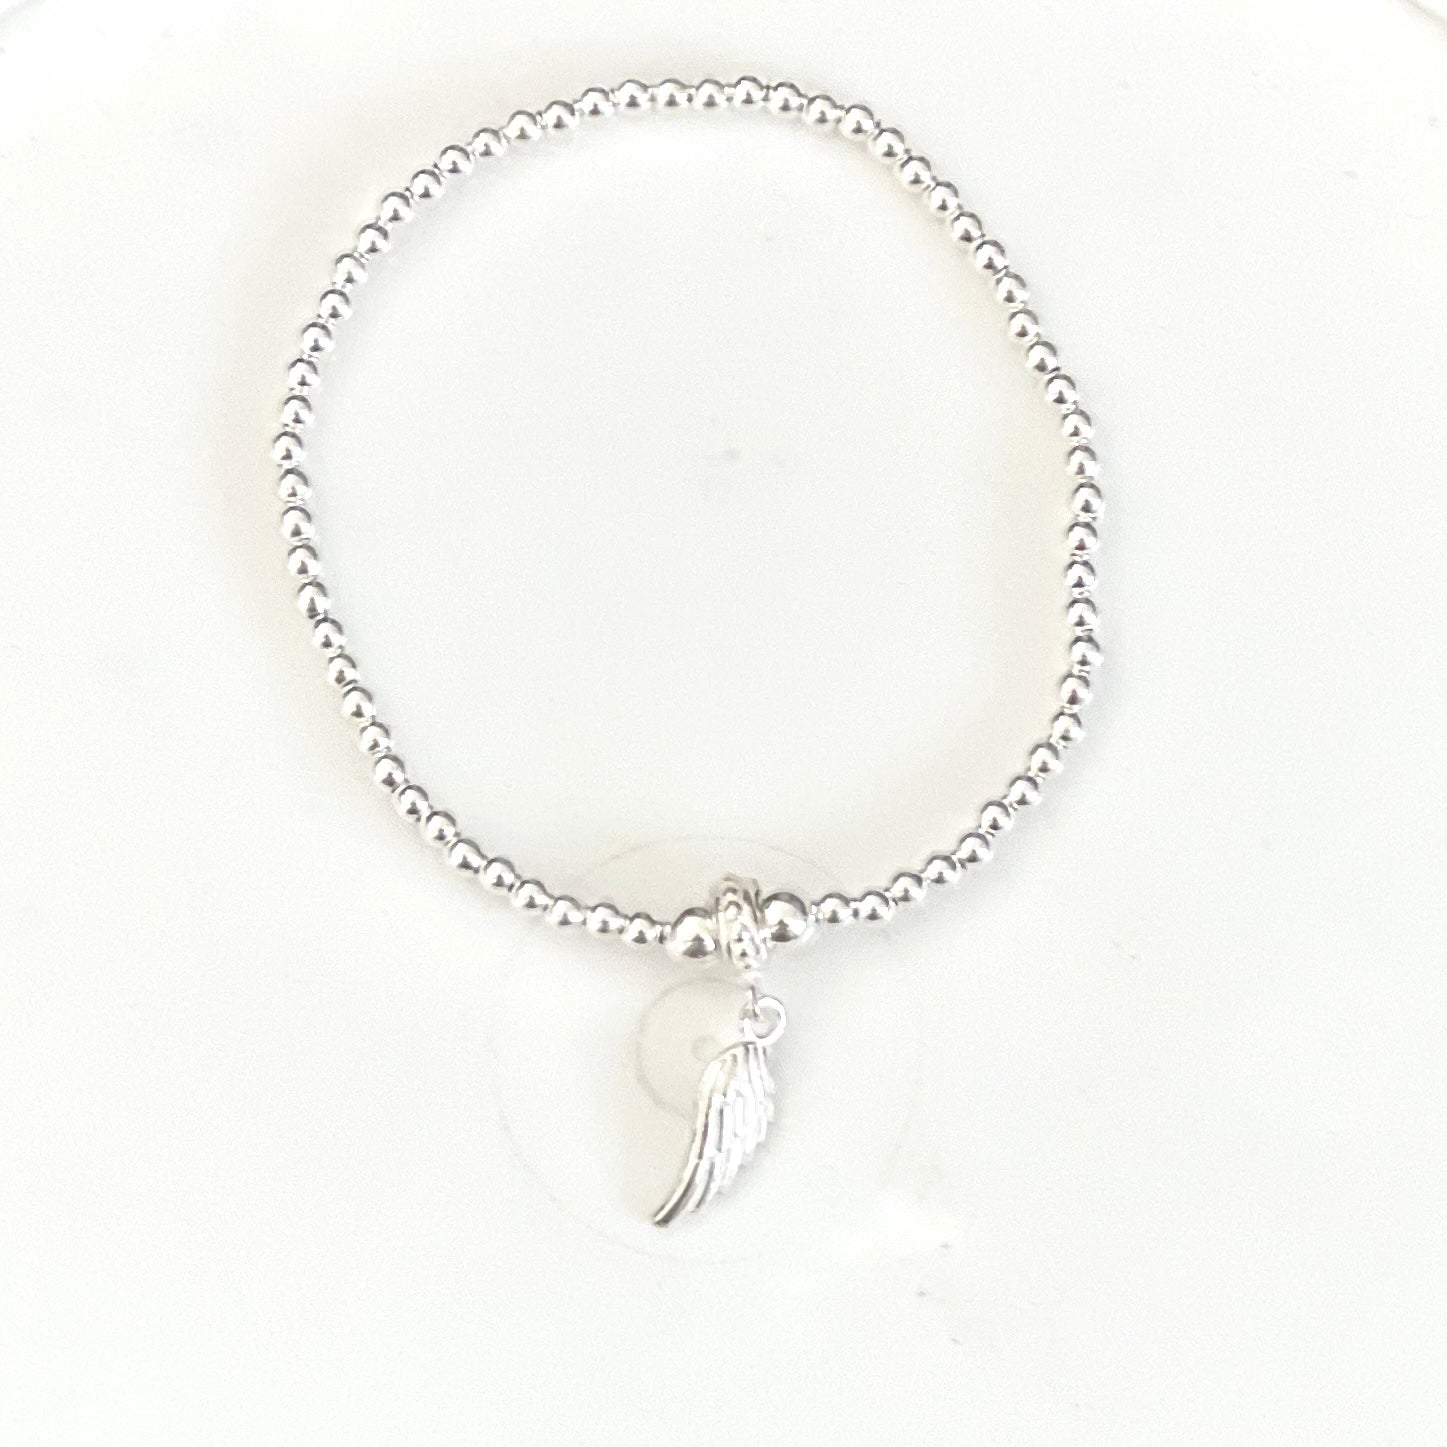 Silver Stretch Stacking Bracelet with Angel Wing Charm